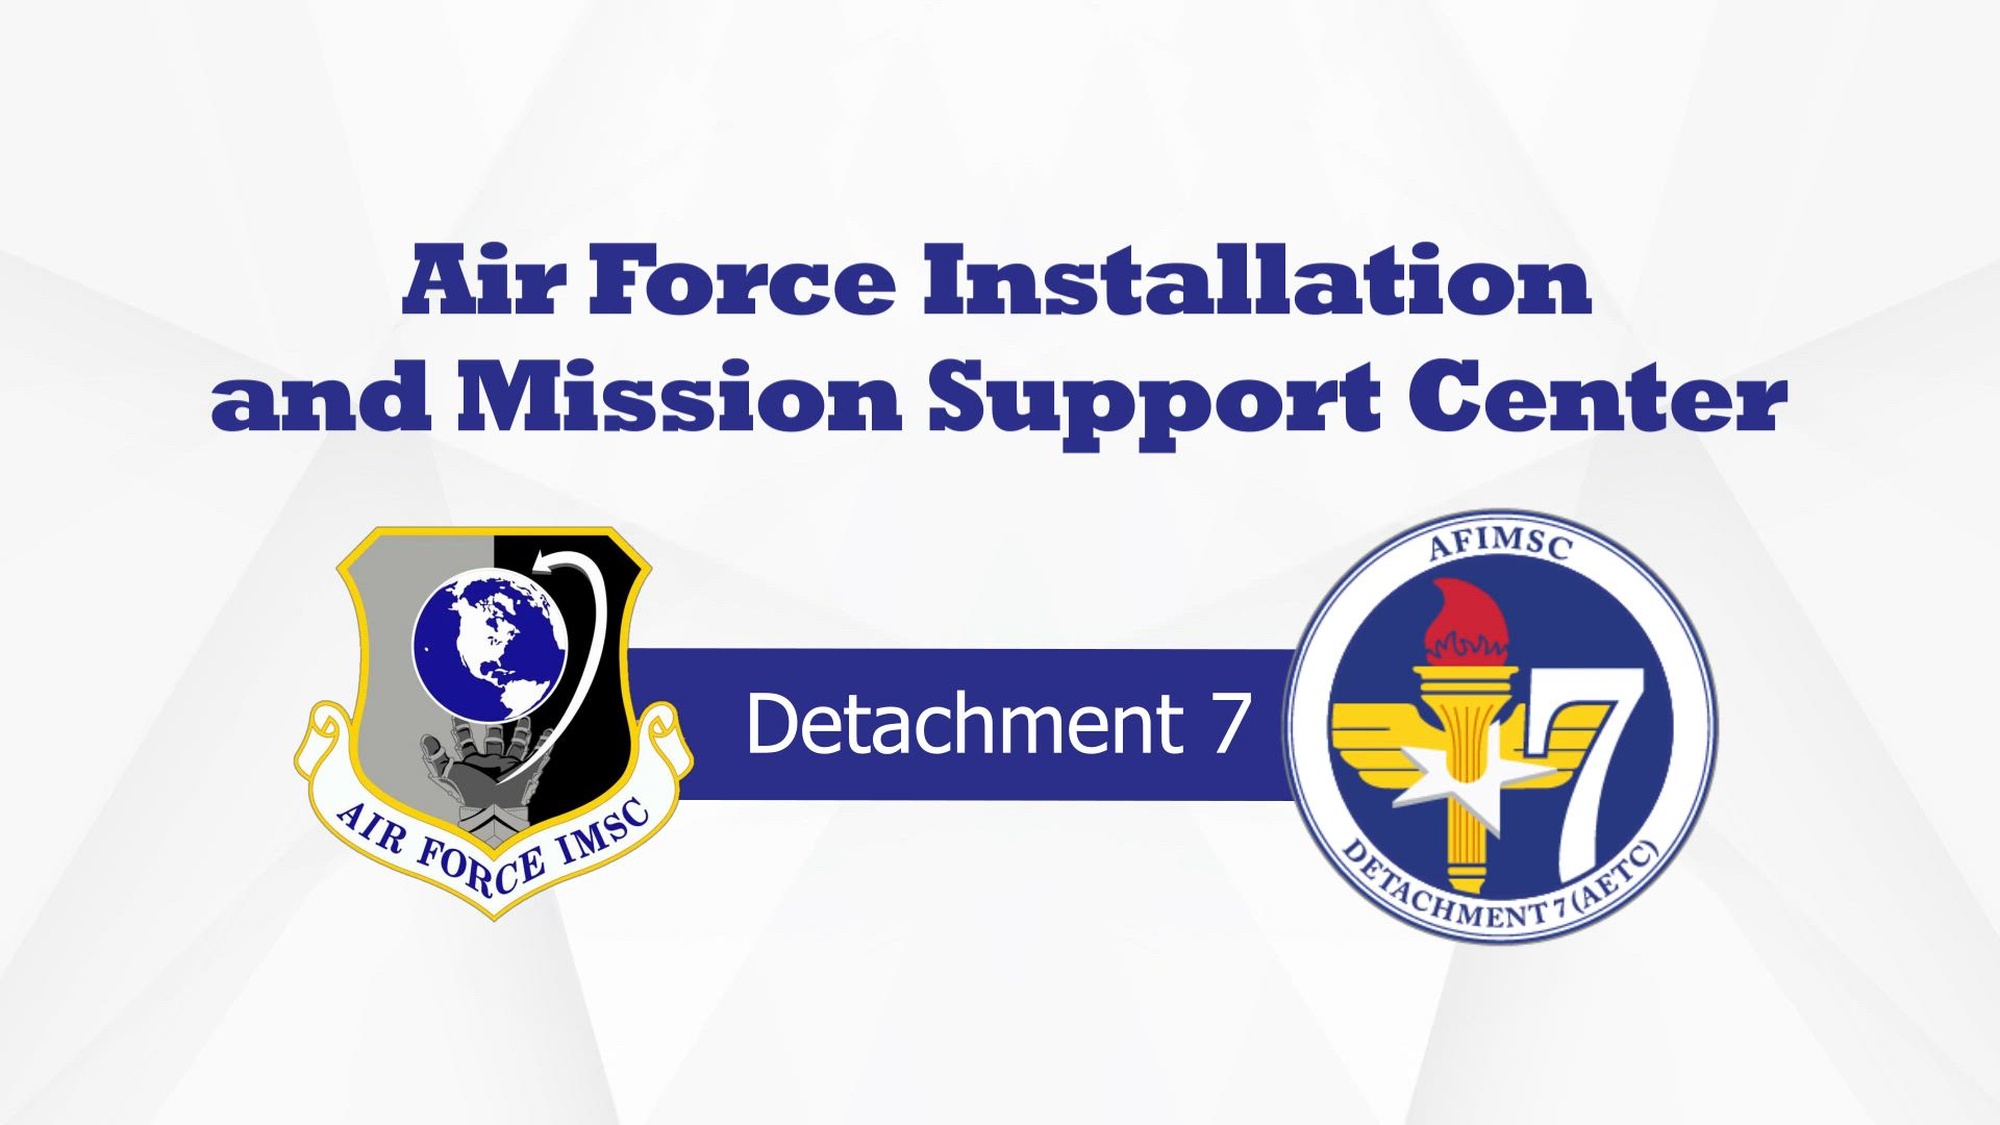 Air Force Installation and Mission Support Center Detachment 7 provides daily installation and mission support services to Air Education and Training Command that enable the Air Force to train and produce our nation's next generation of warfighters.